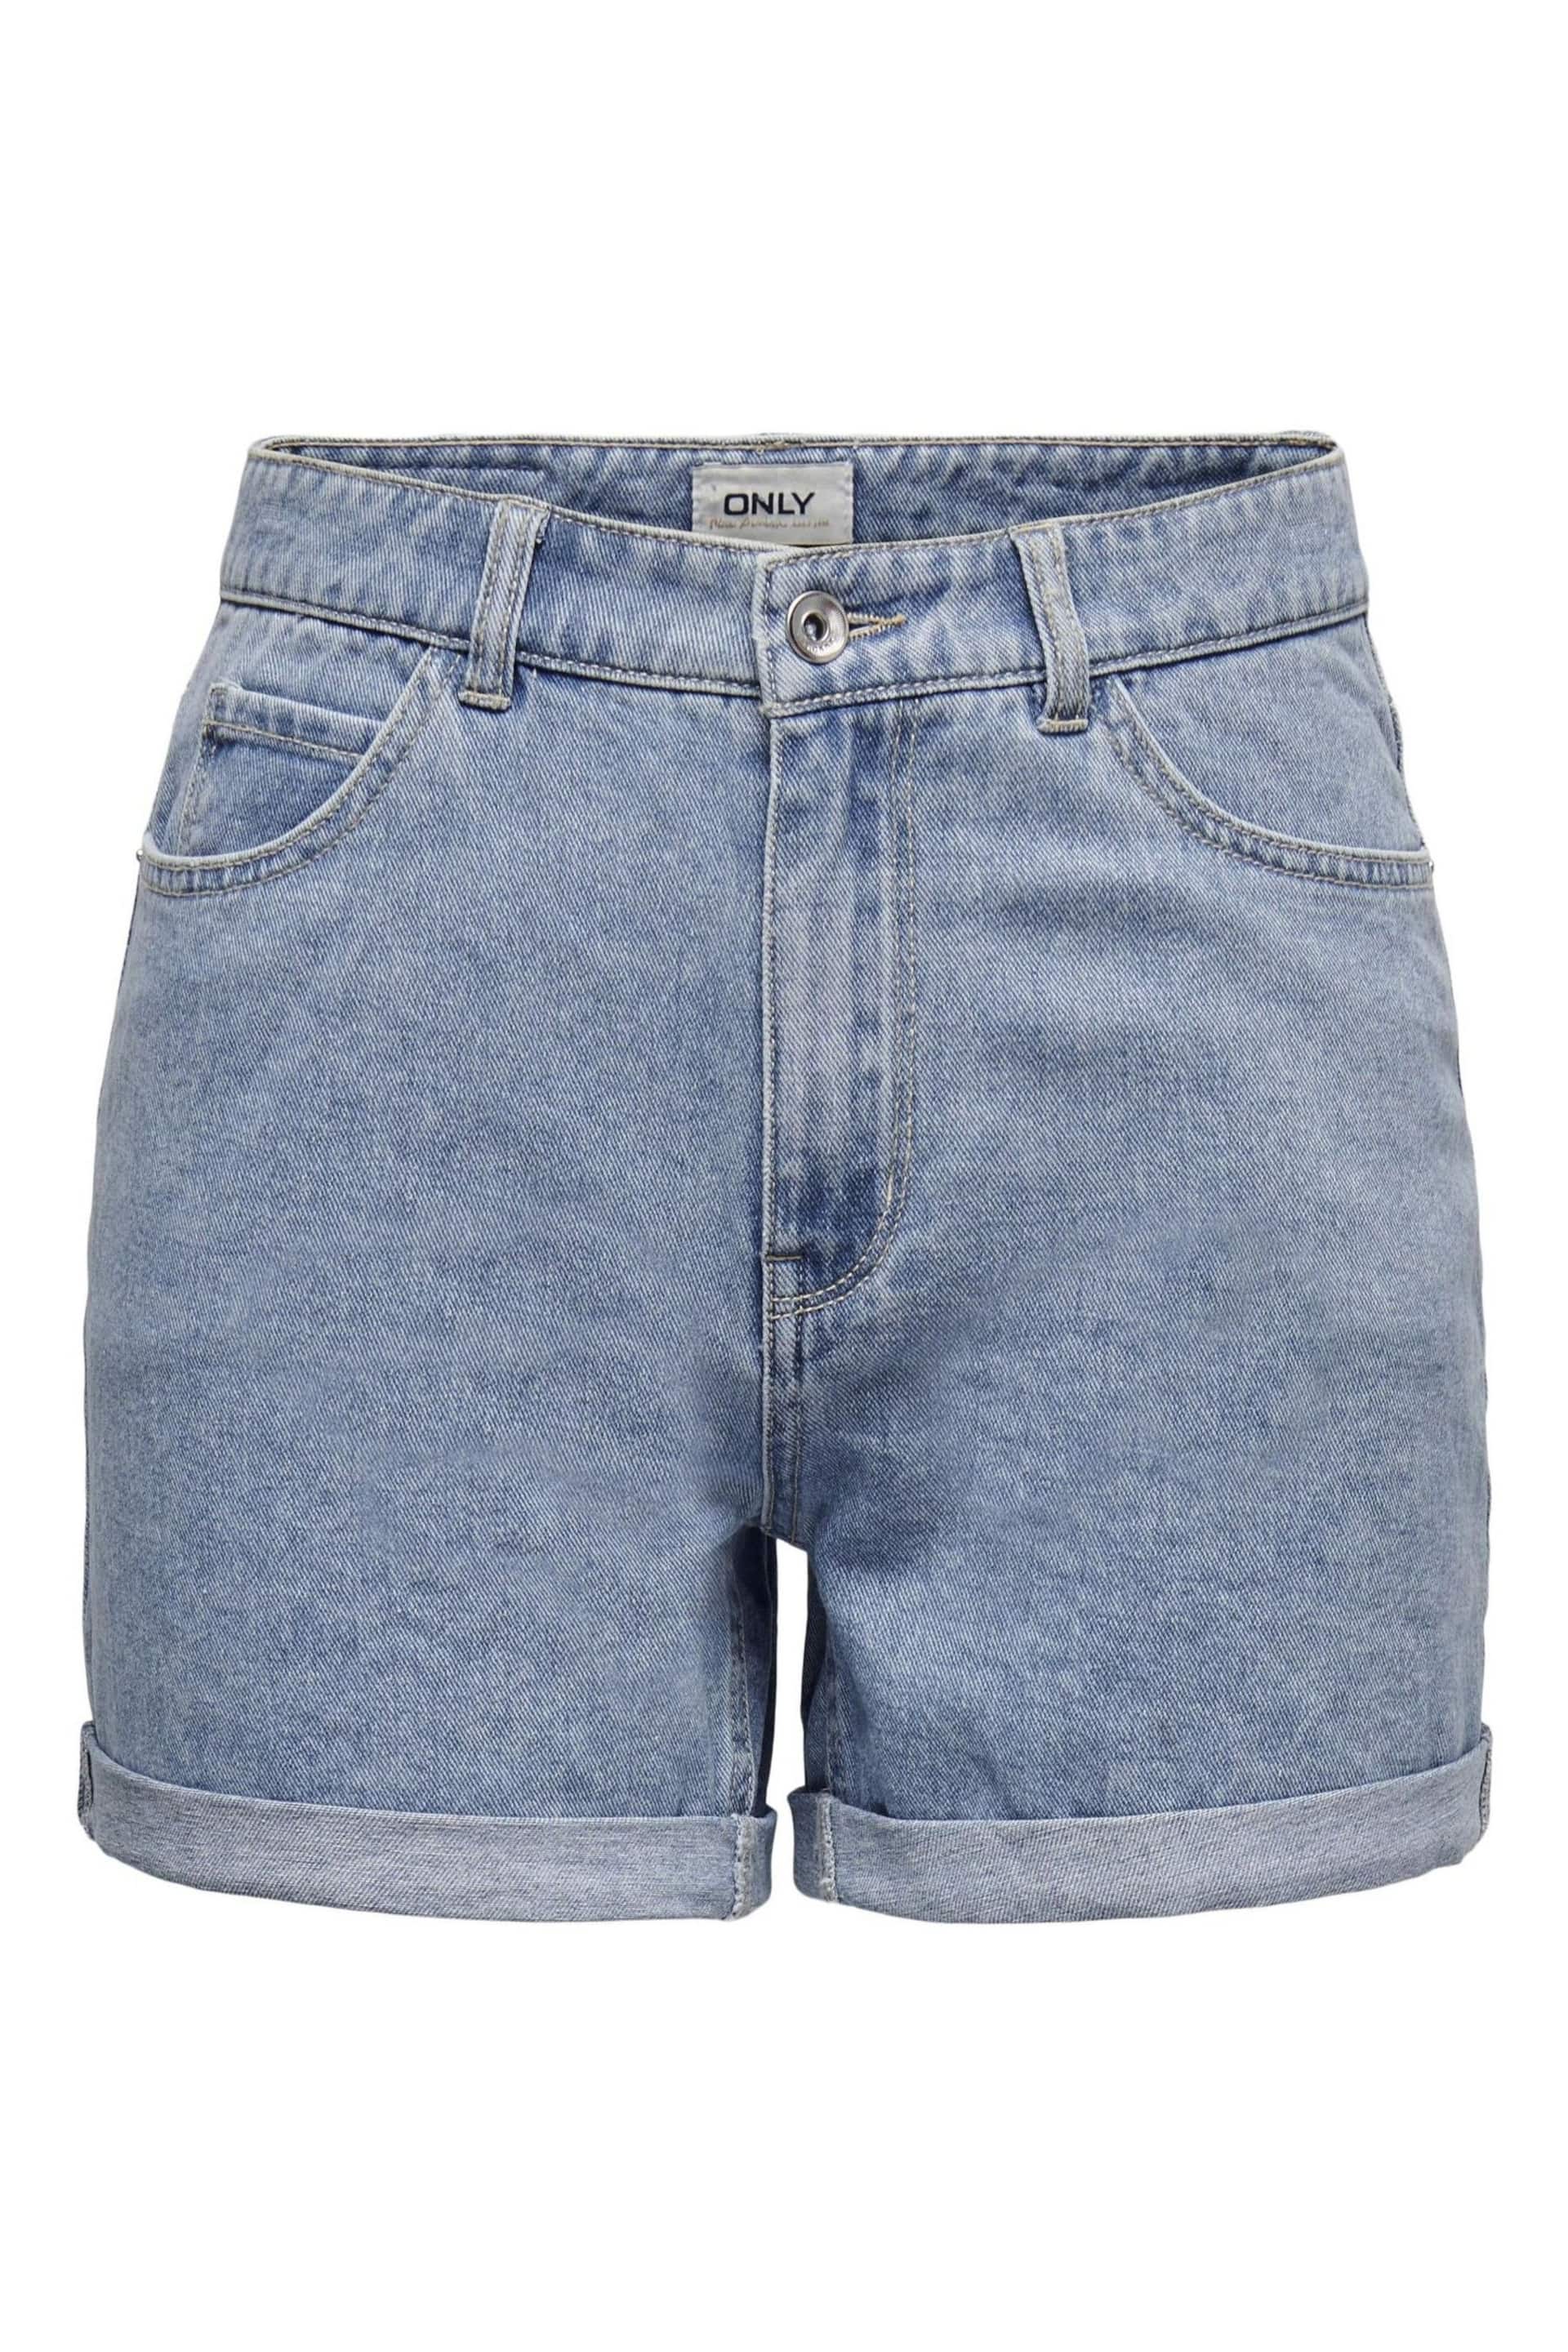 ONLY Blue High Waisted Denim Mom Shorts - Image 5 of 6